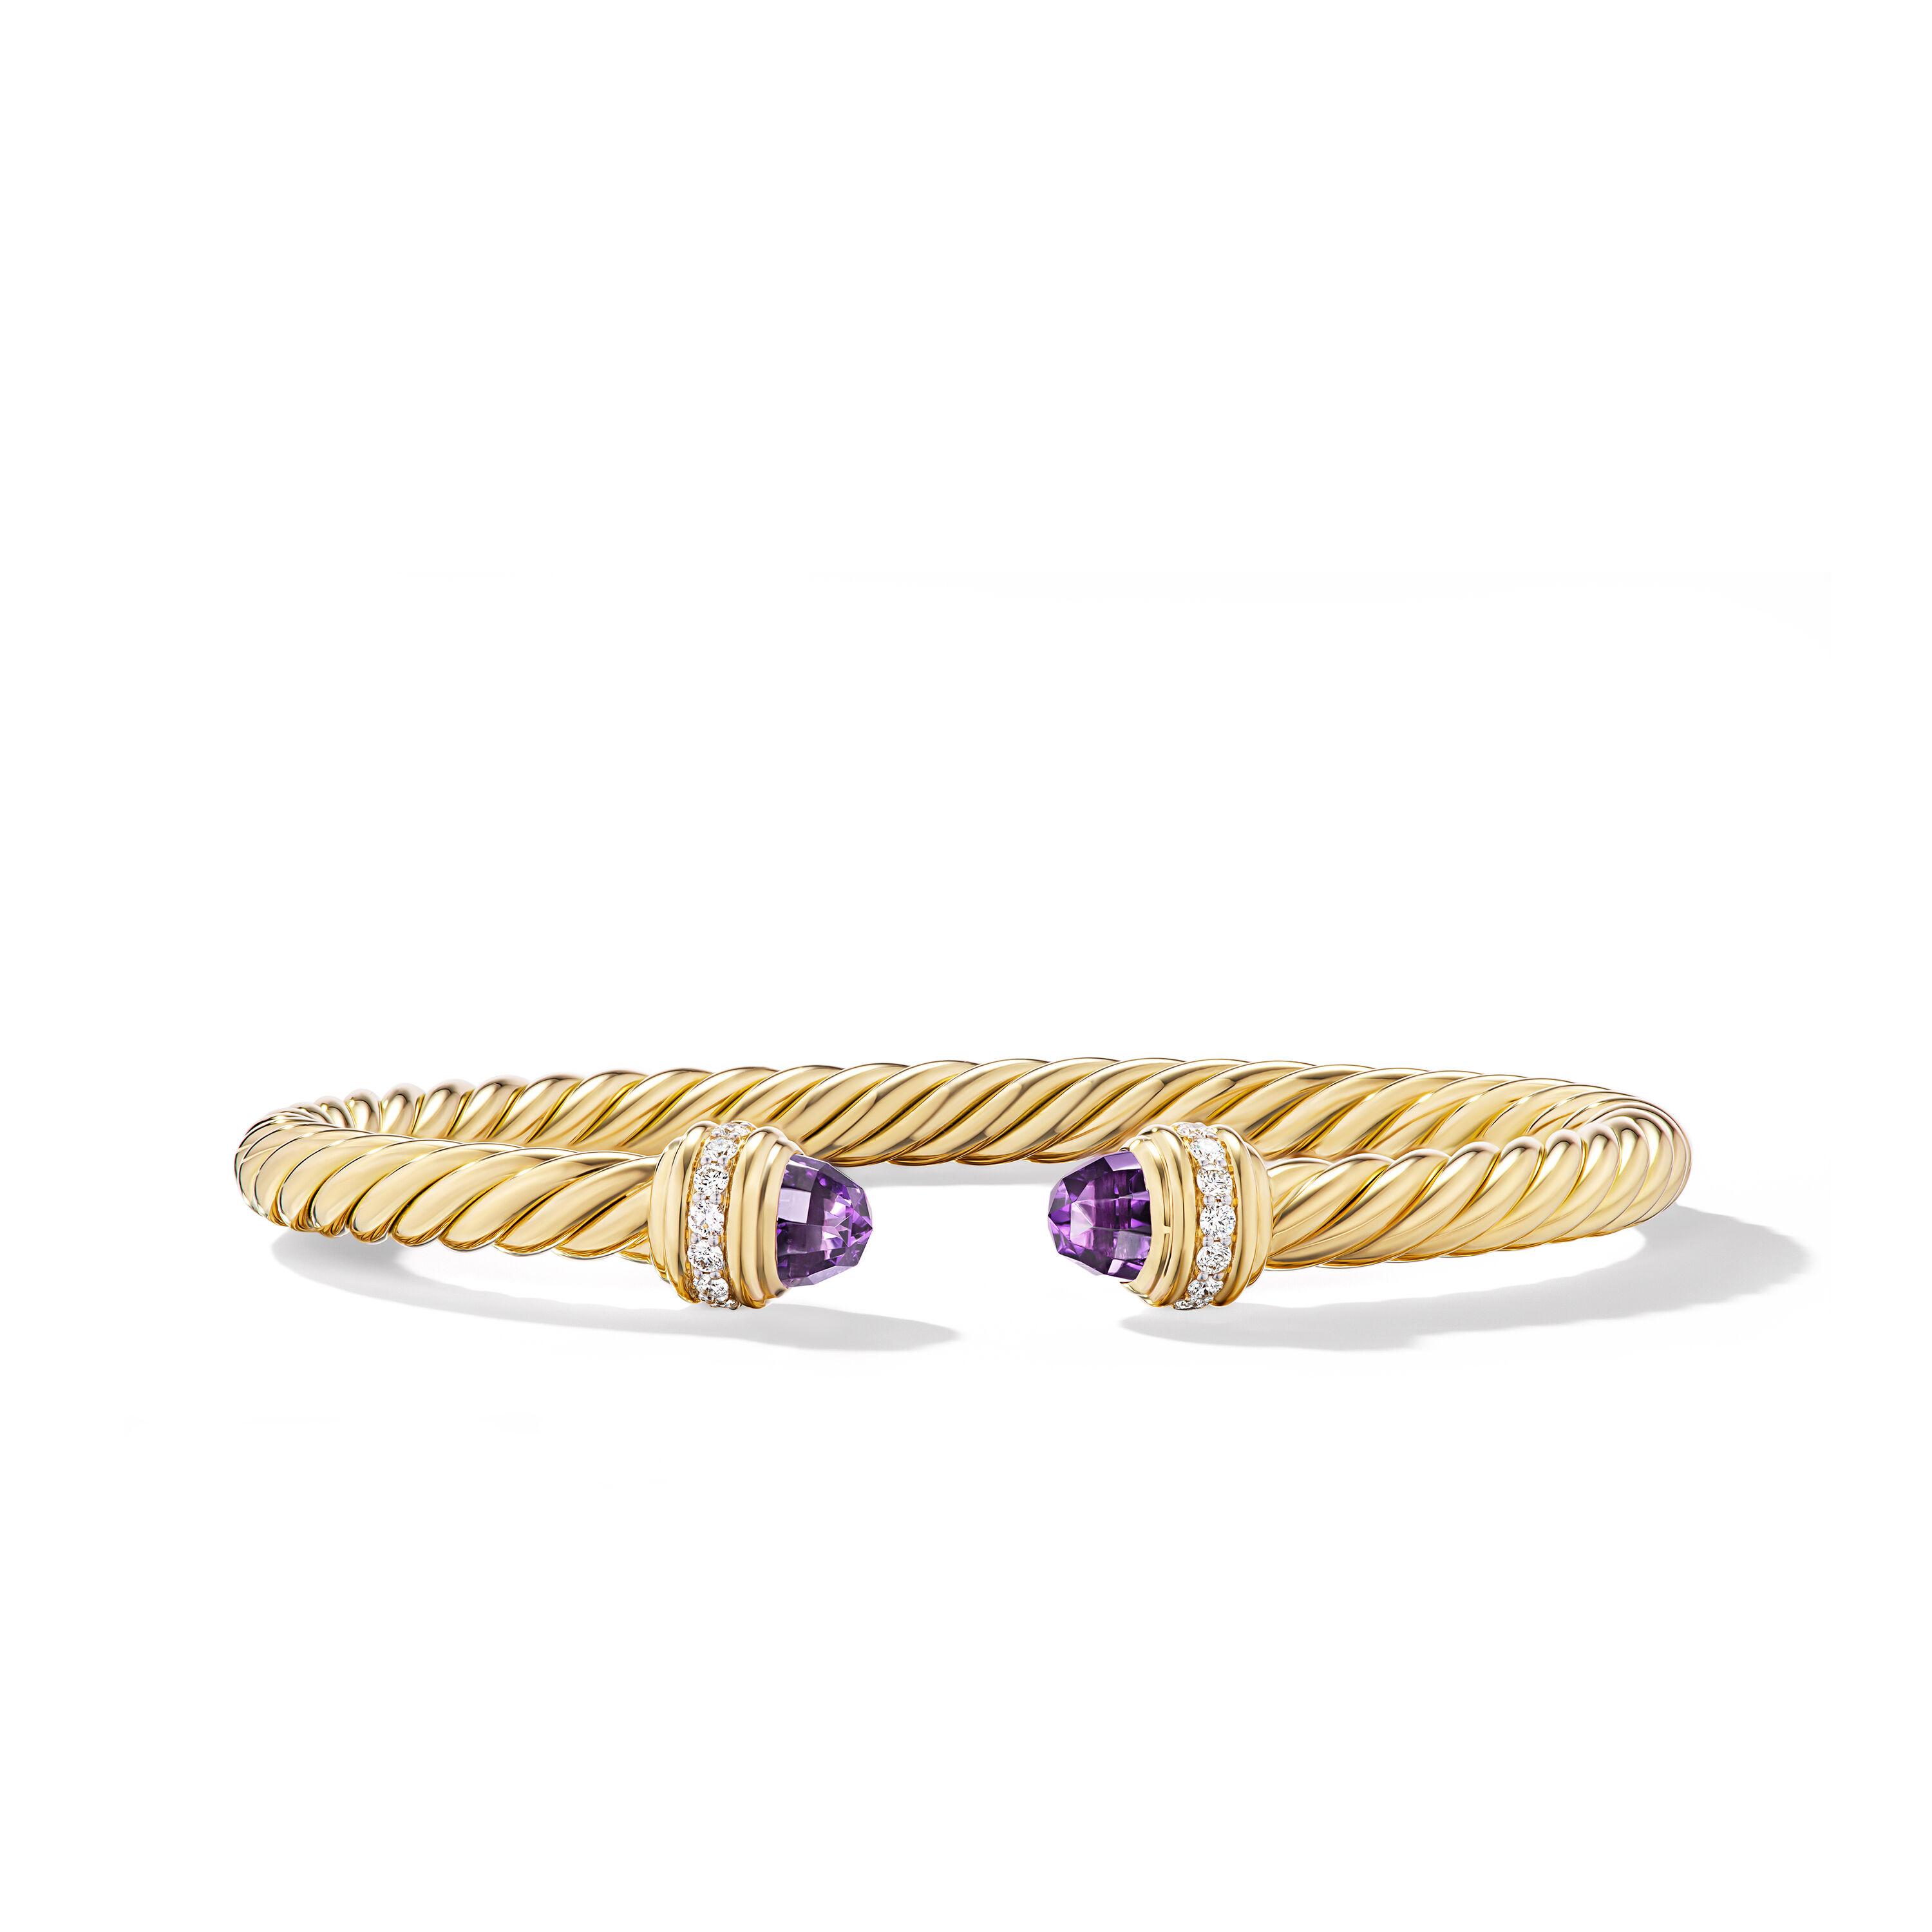 David Yurman Classic Cablespira 5mm Bracelet in 18K Yellow Gold with Amethyst and Diamonds